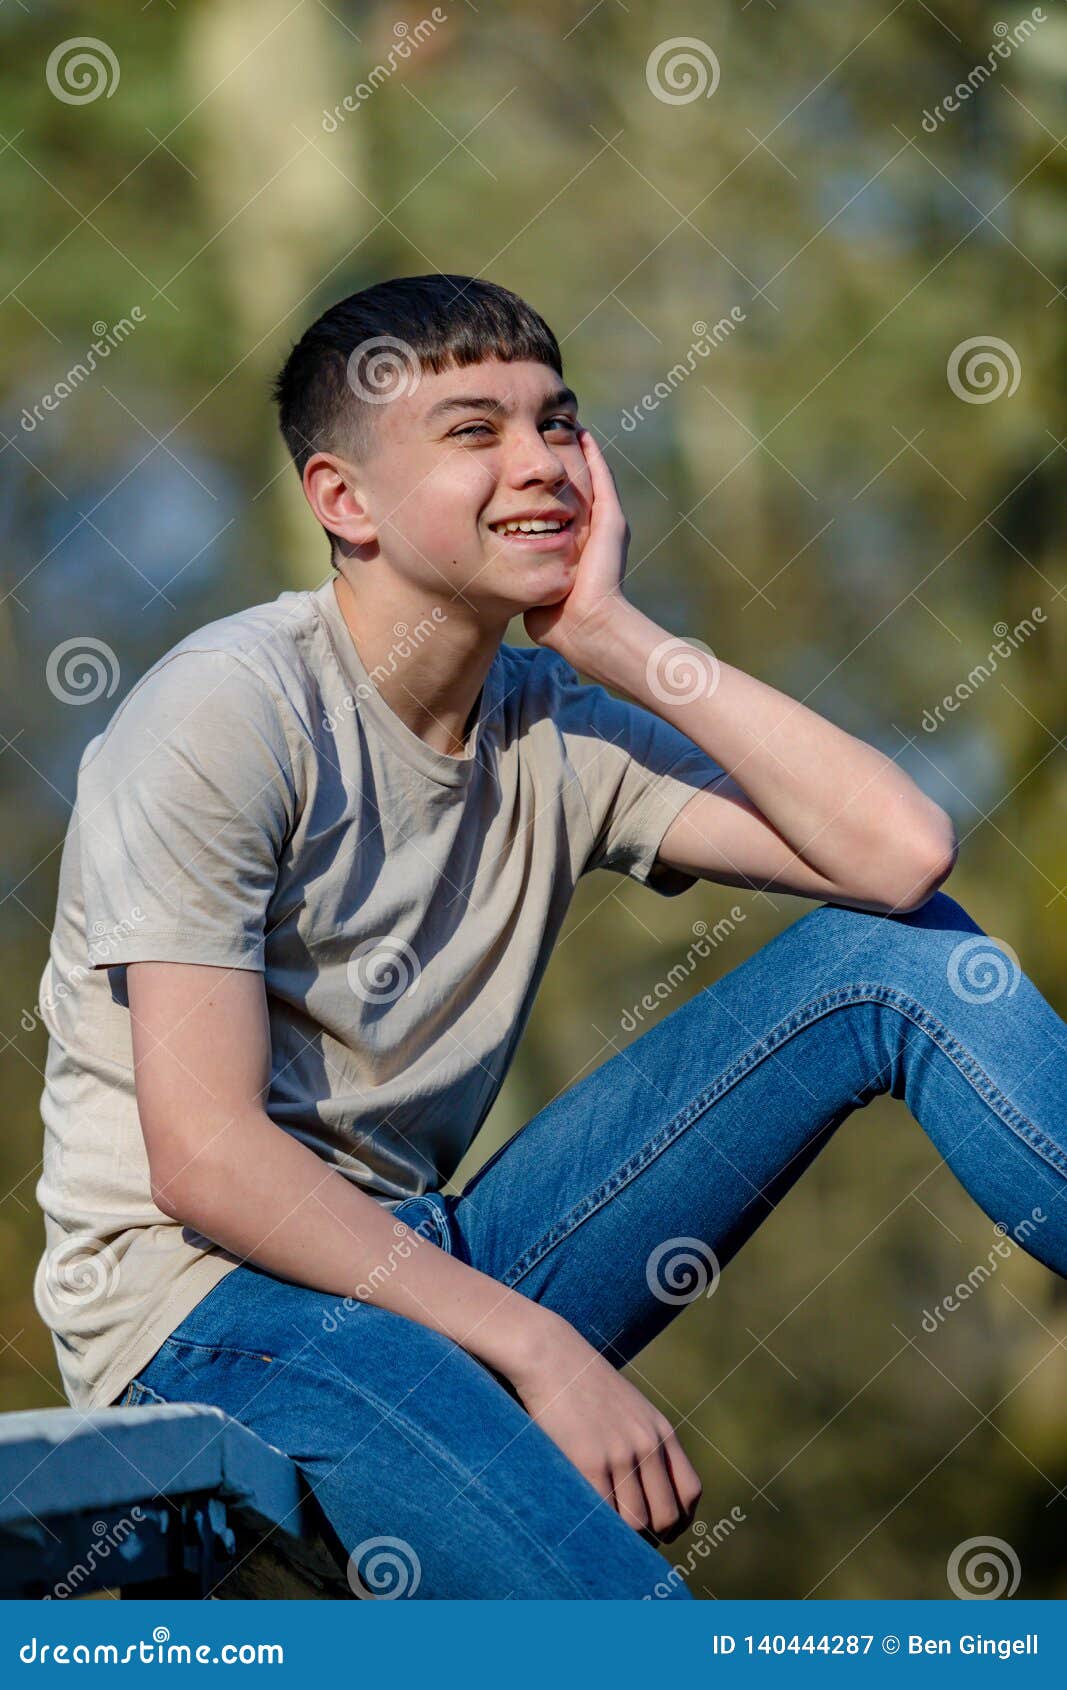 Teenage Boy Outside on a Bright Spring Day Stock Image - Image of trees ...